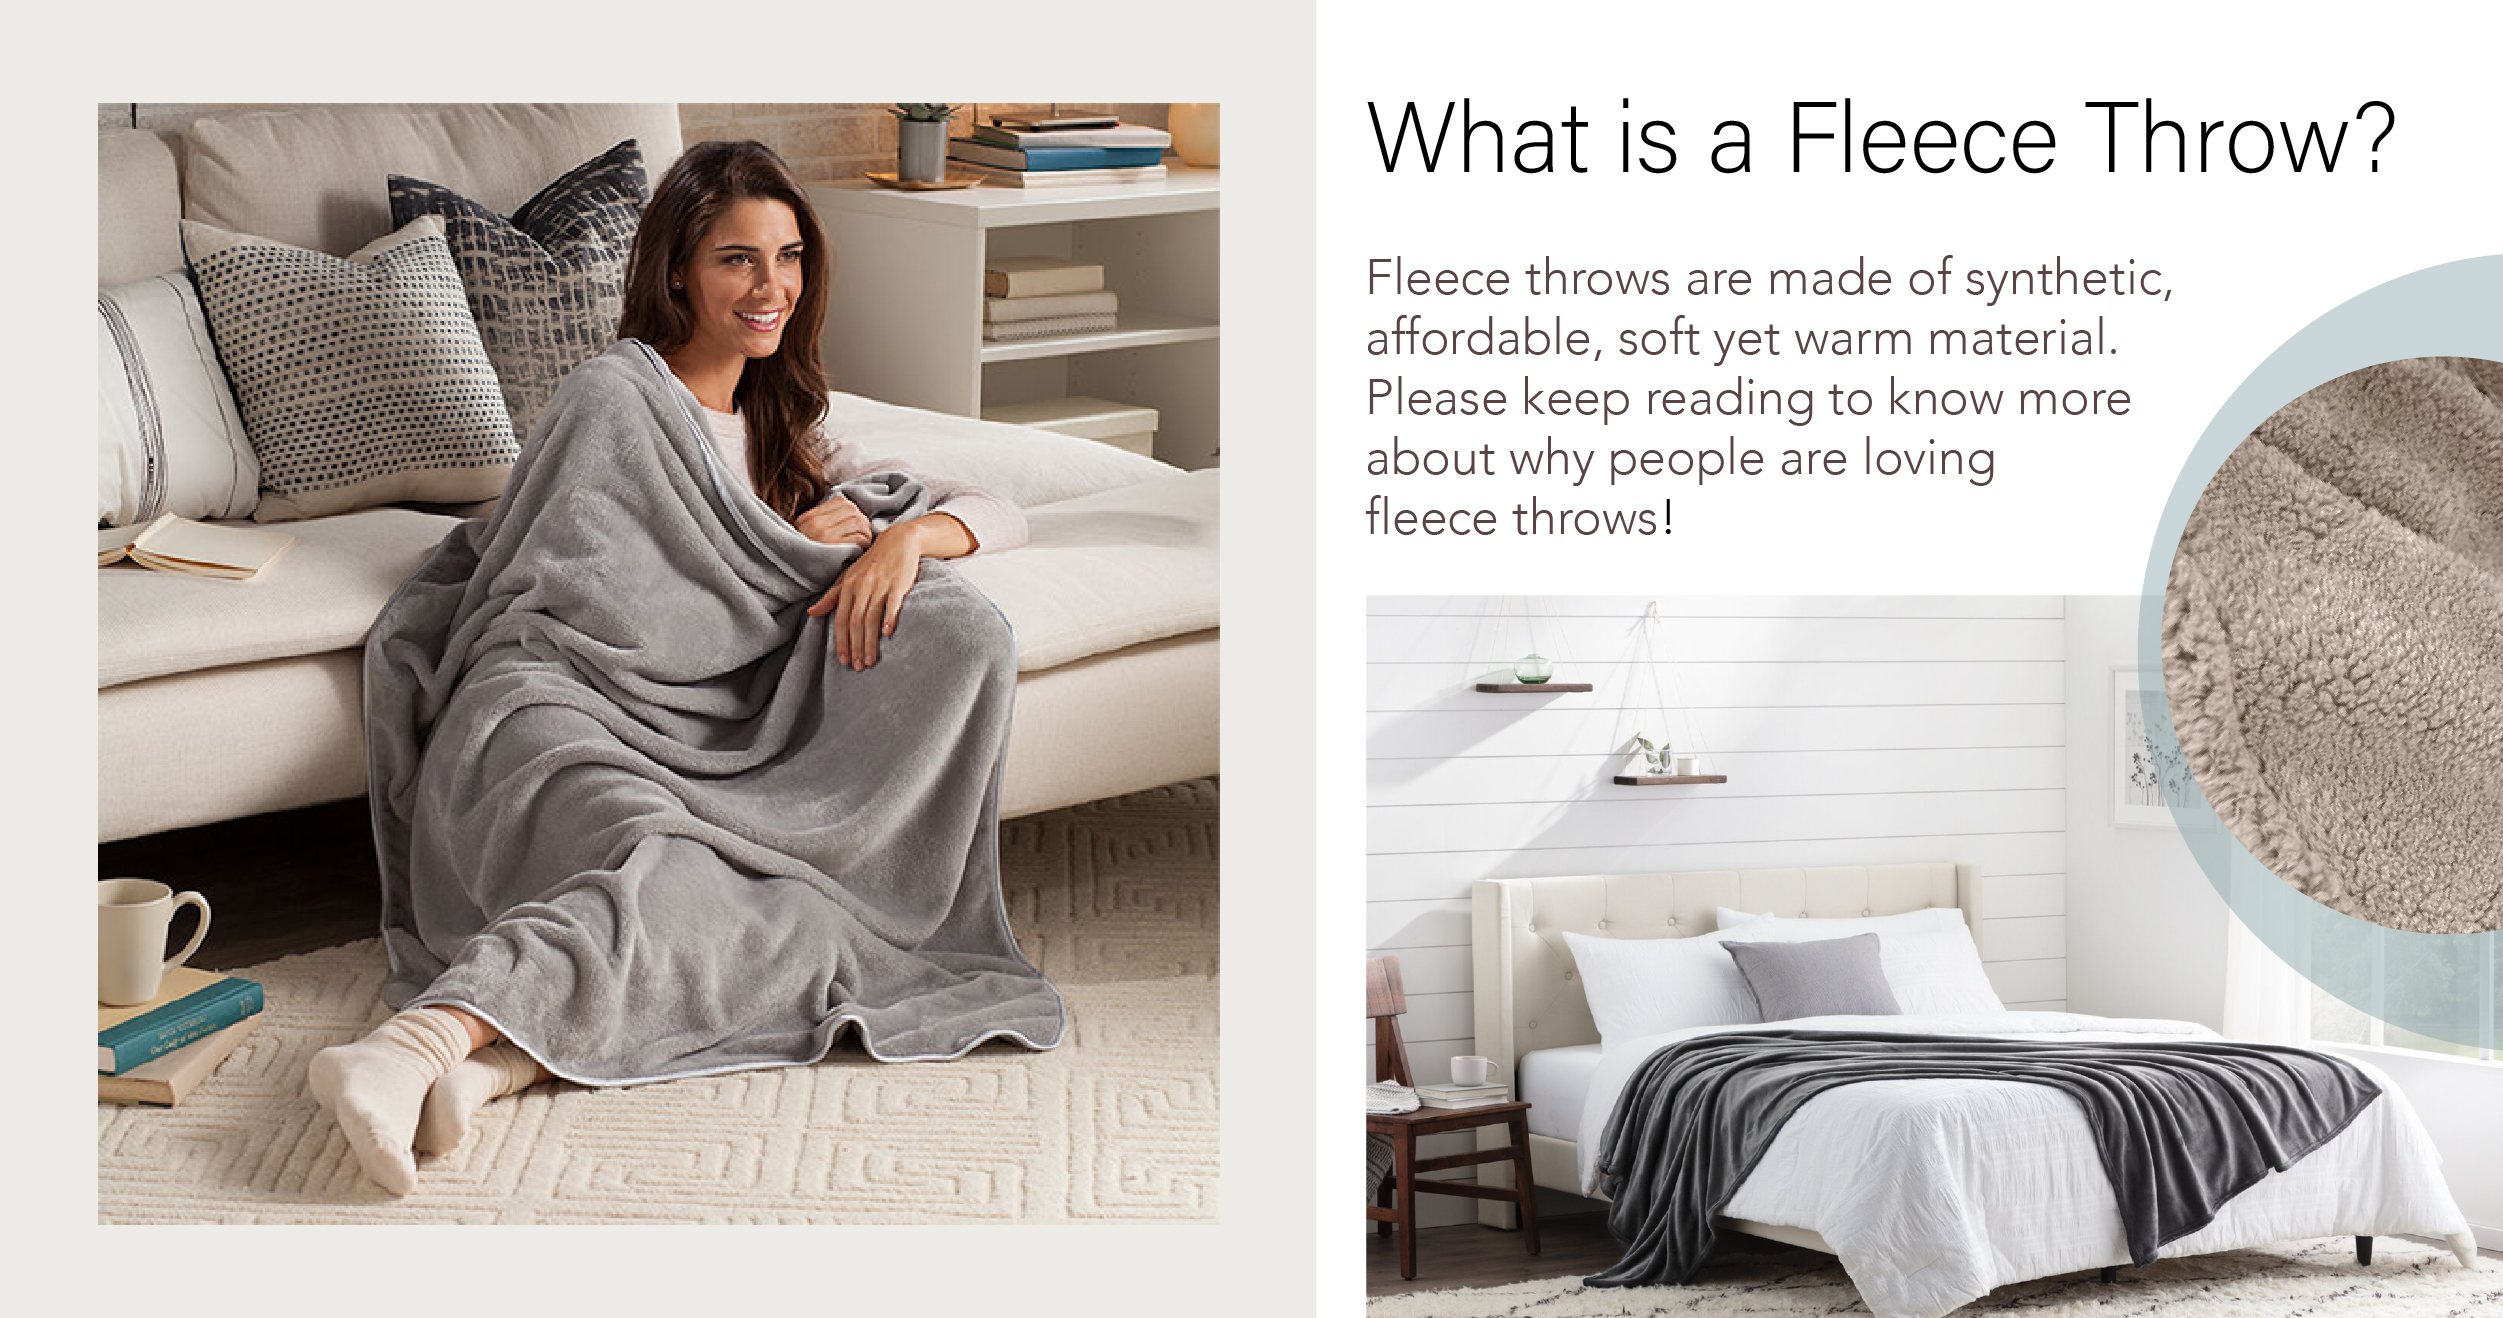 What is a Fleece Throw?